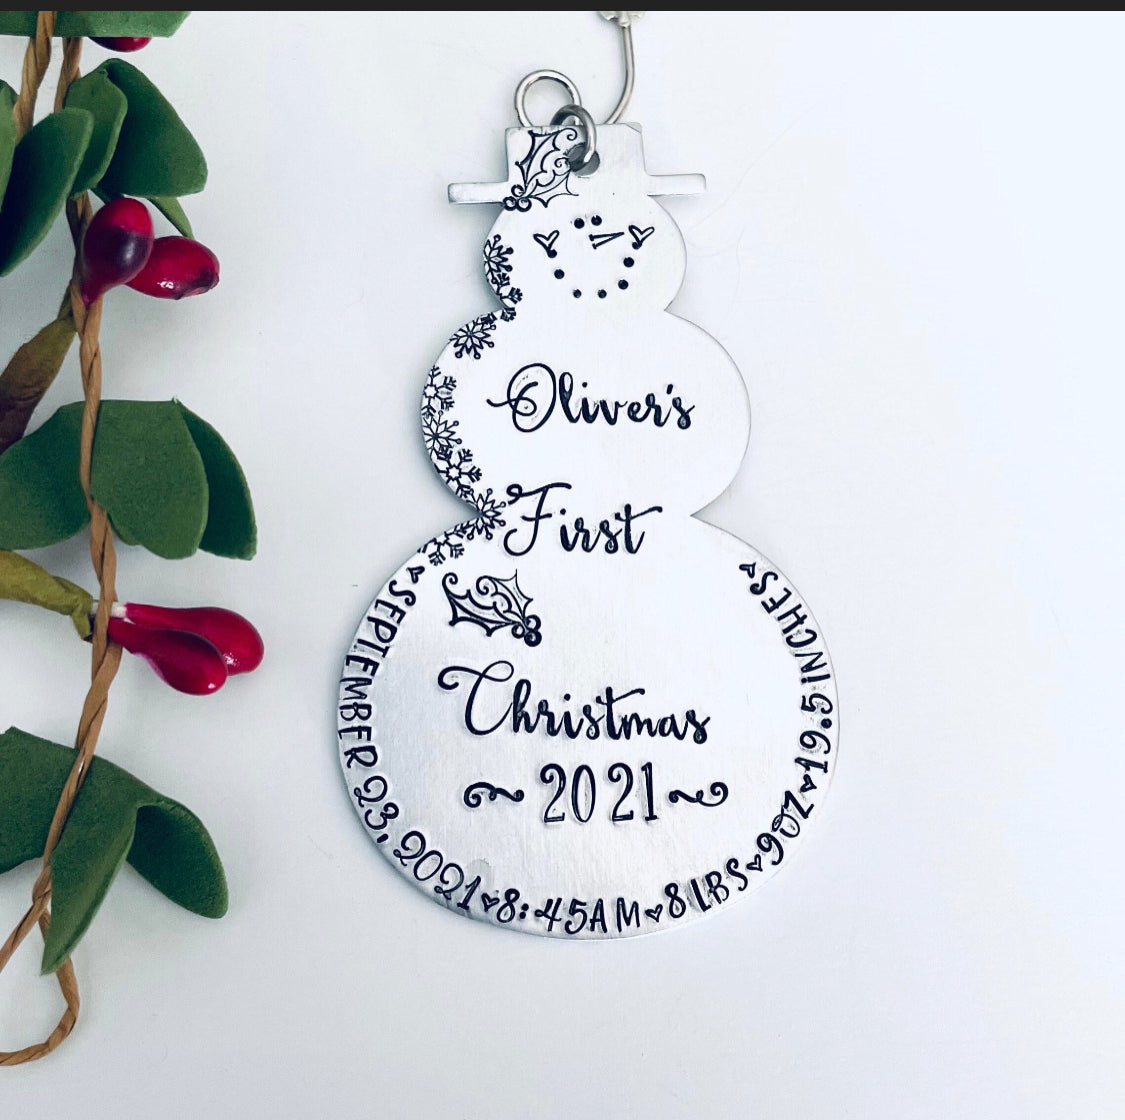 Baby’s first Christmas ornament hand stamped metal snowman Birth announcement Birth stats ornament snowmen new baby 2023 ornament